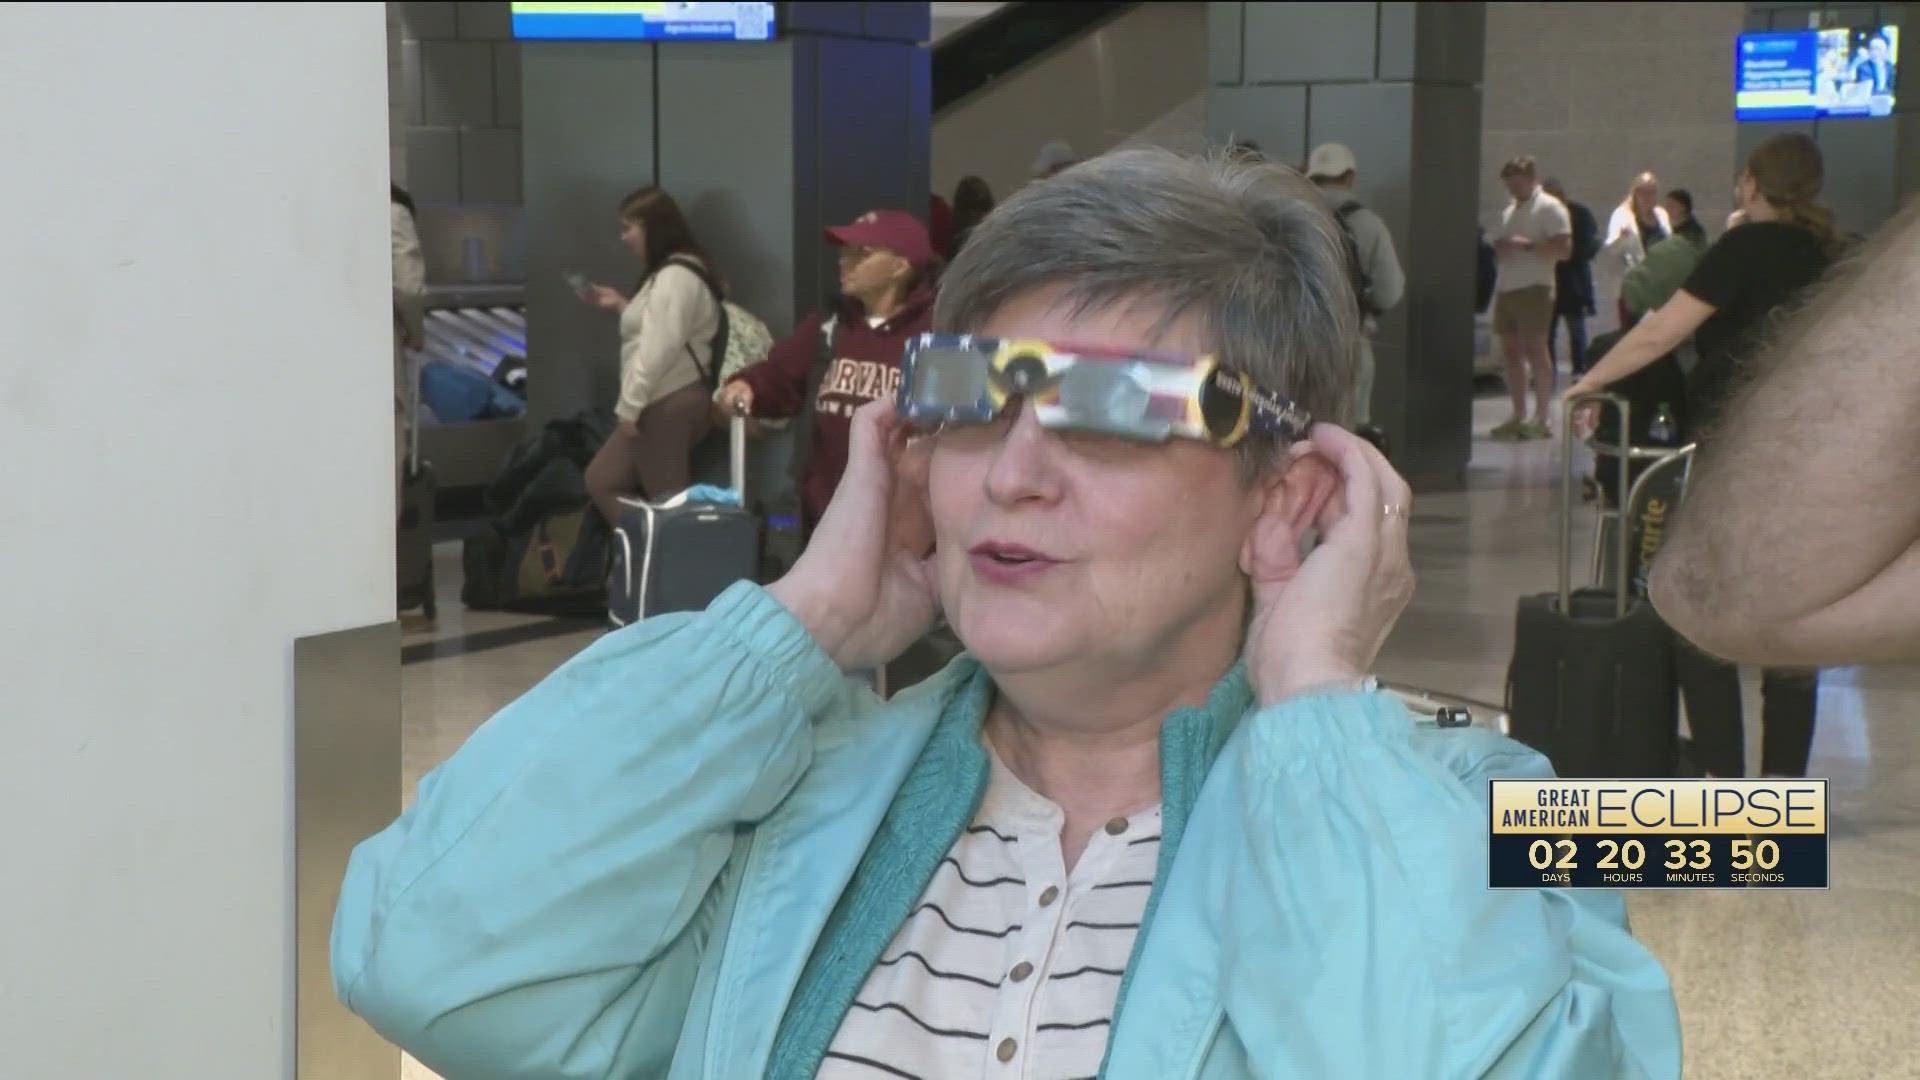 KVUE's Melia Masumoto spoke with eclipse spectators from Arizona, North Carolina and even a couple from Canada who are in Central Texas for their honeymoon.